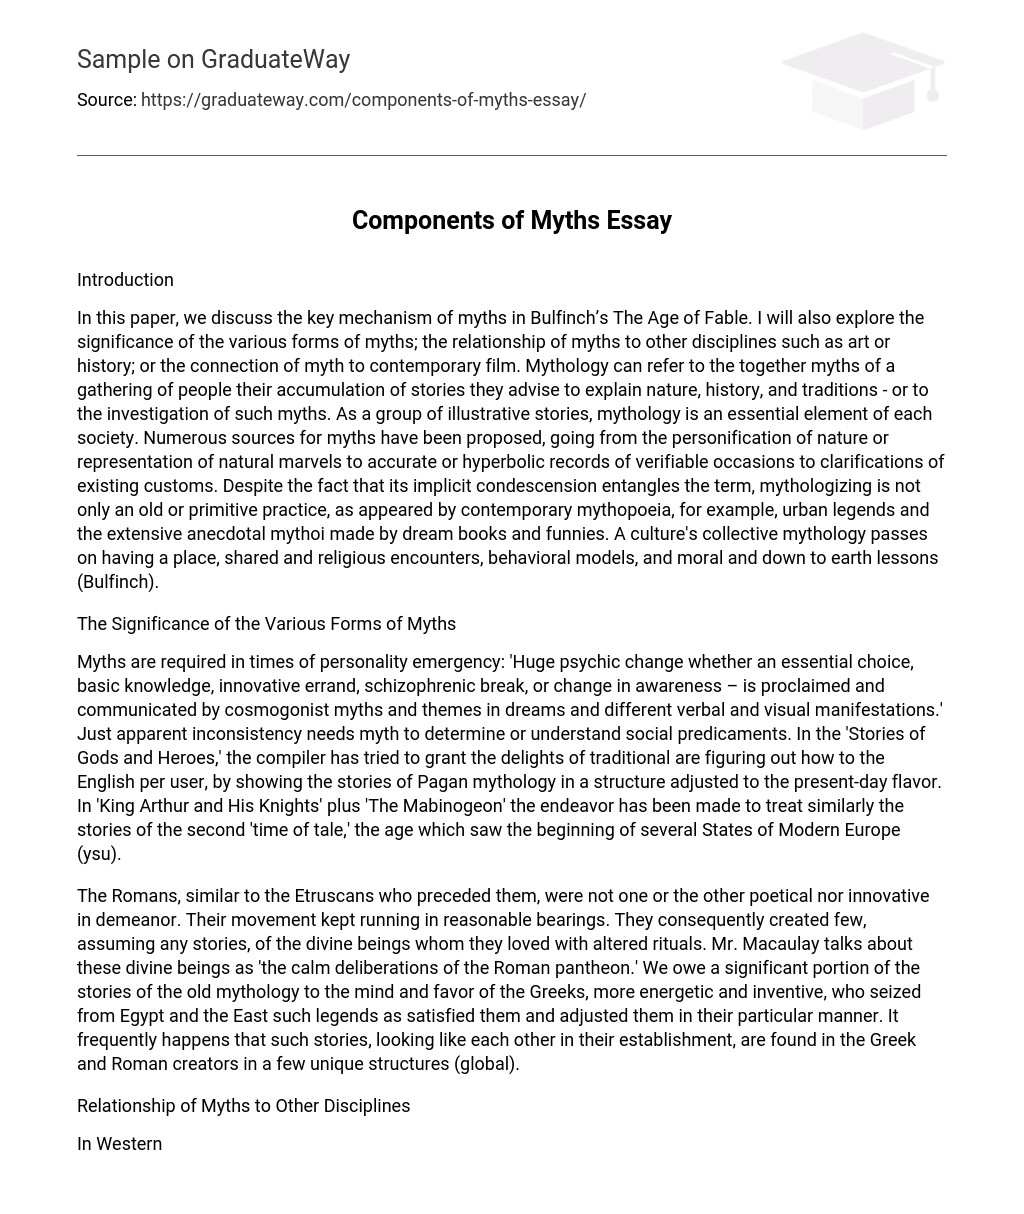 Components of Myths Essay